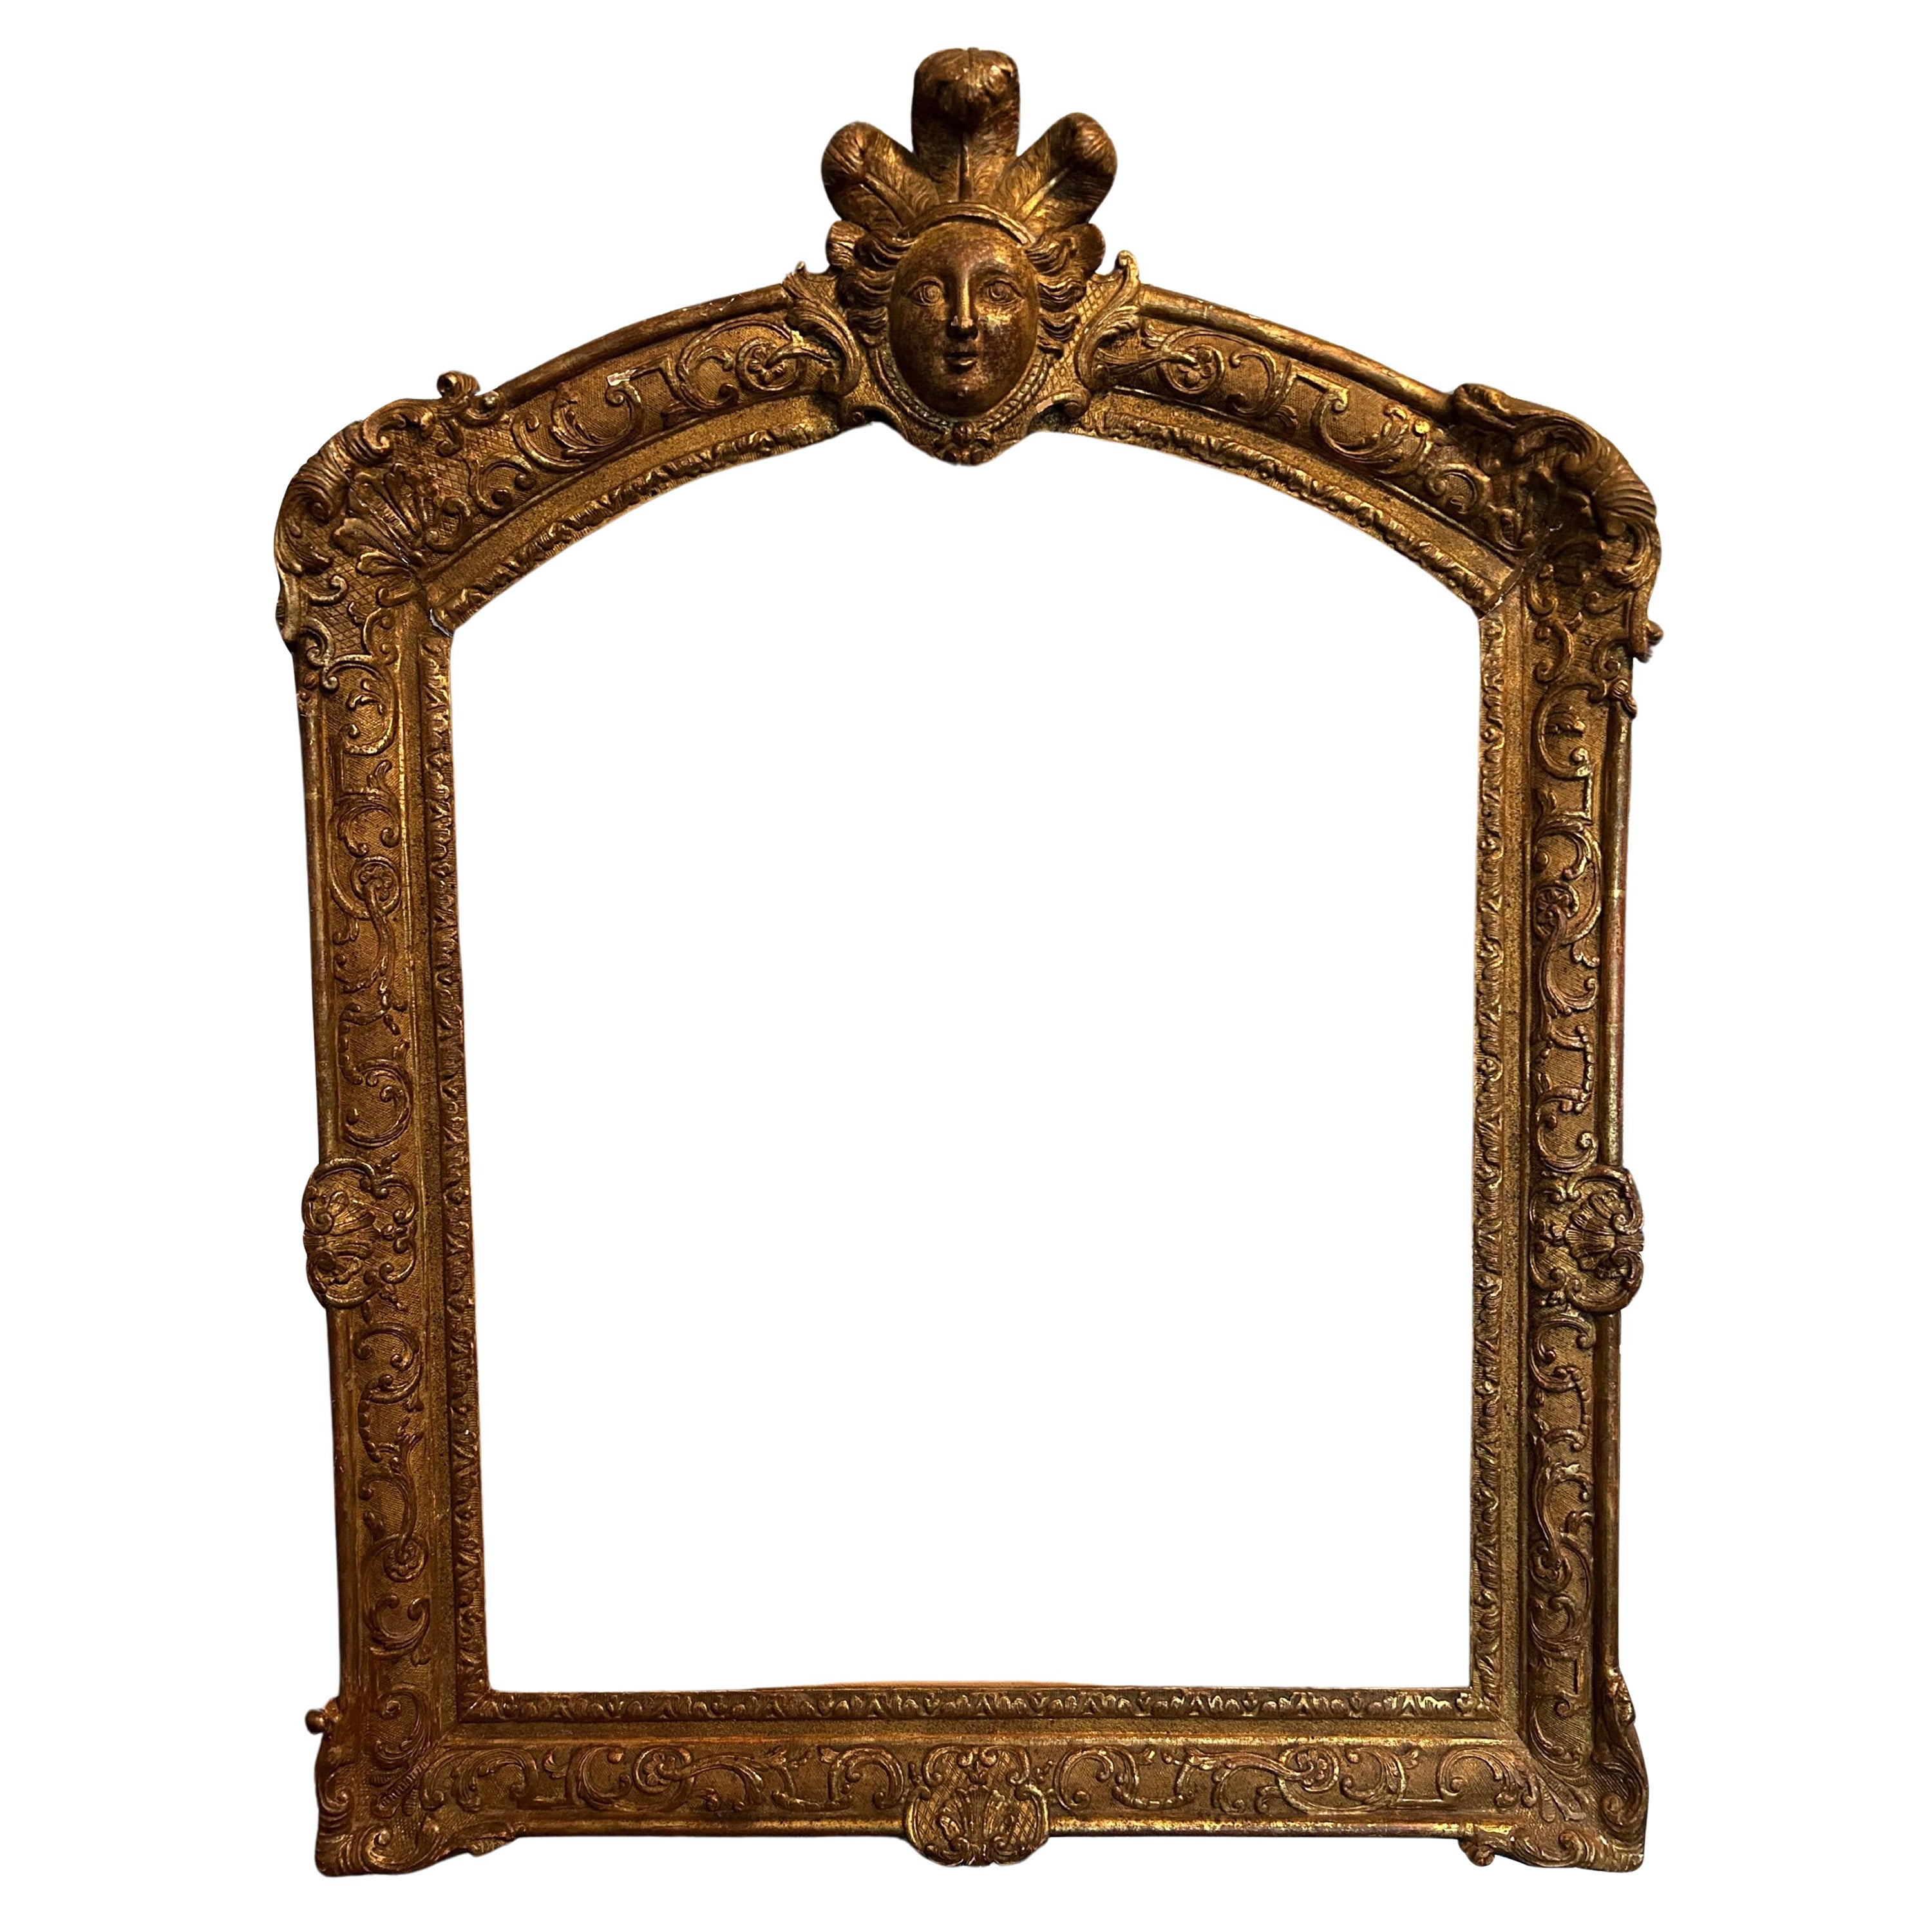 Large French Giltwood Mirror Frame with Rounded Top